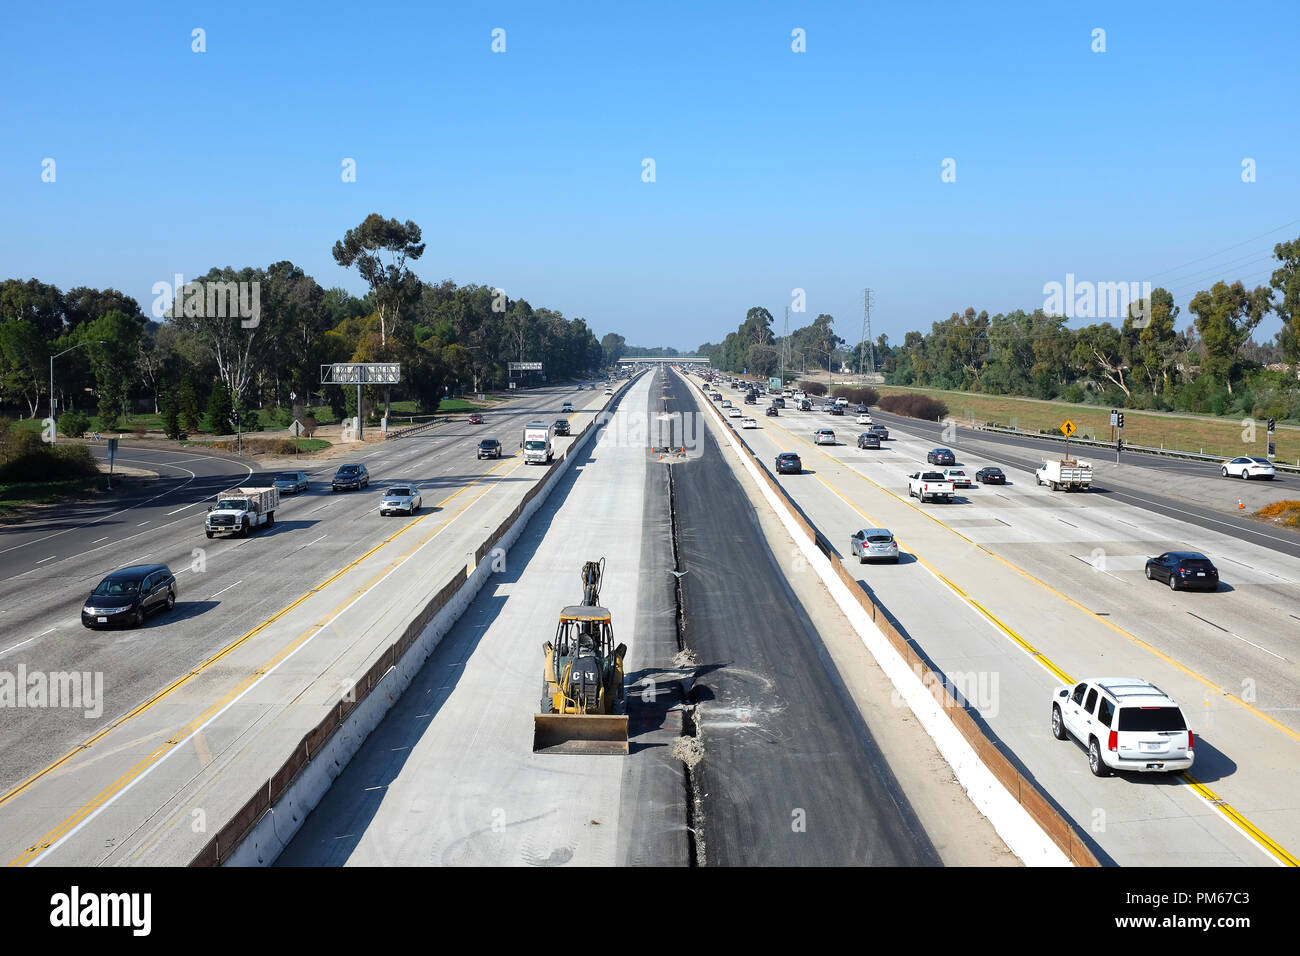 IRVINE, CALIFORNIA - FEBRUARY 6, 2018: 405 Freeway widening project. Caltrans is making the improvement to the freeway between Jamboree Road and Sand  Stock Photo